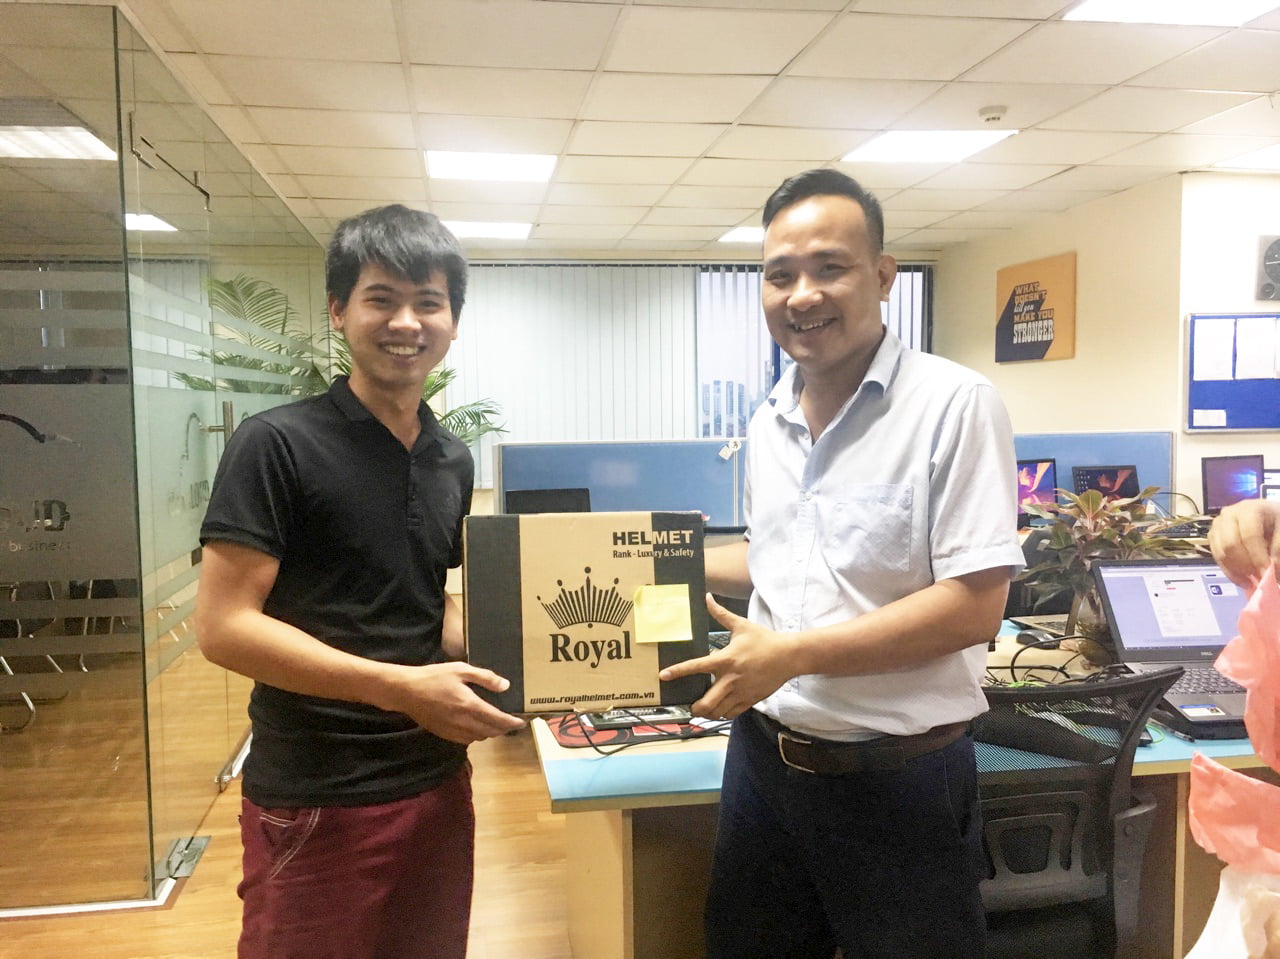 The CEO gives gifts to Ninh - Hanoi